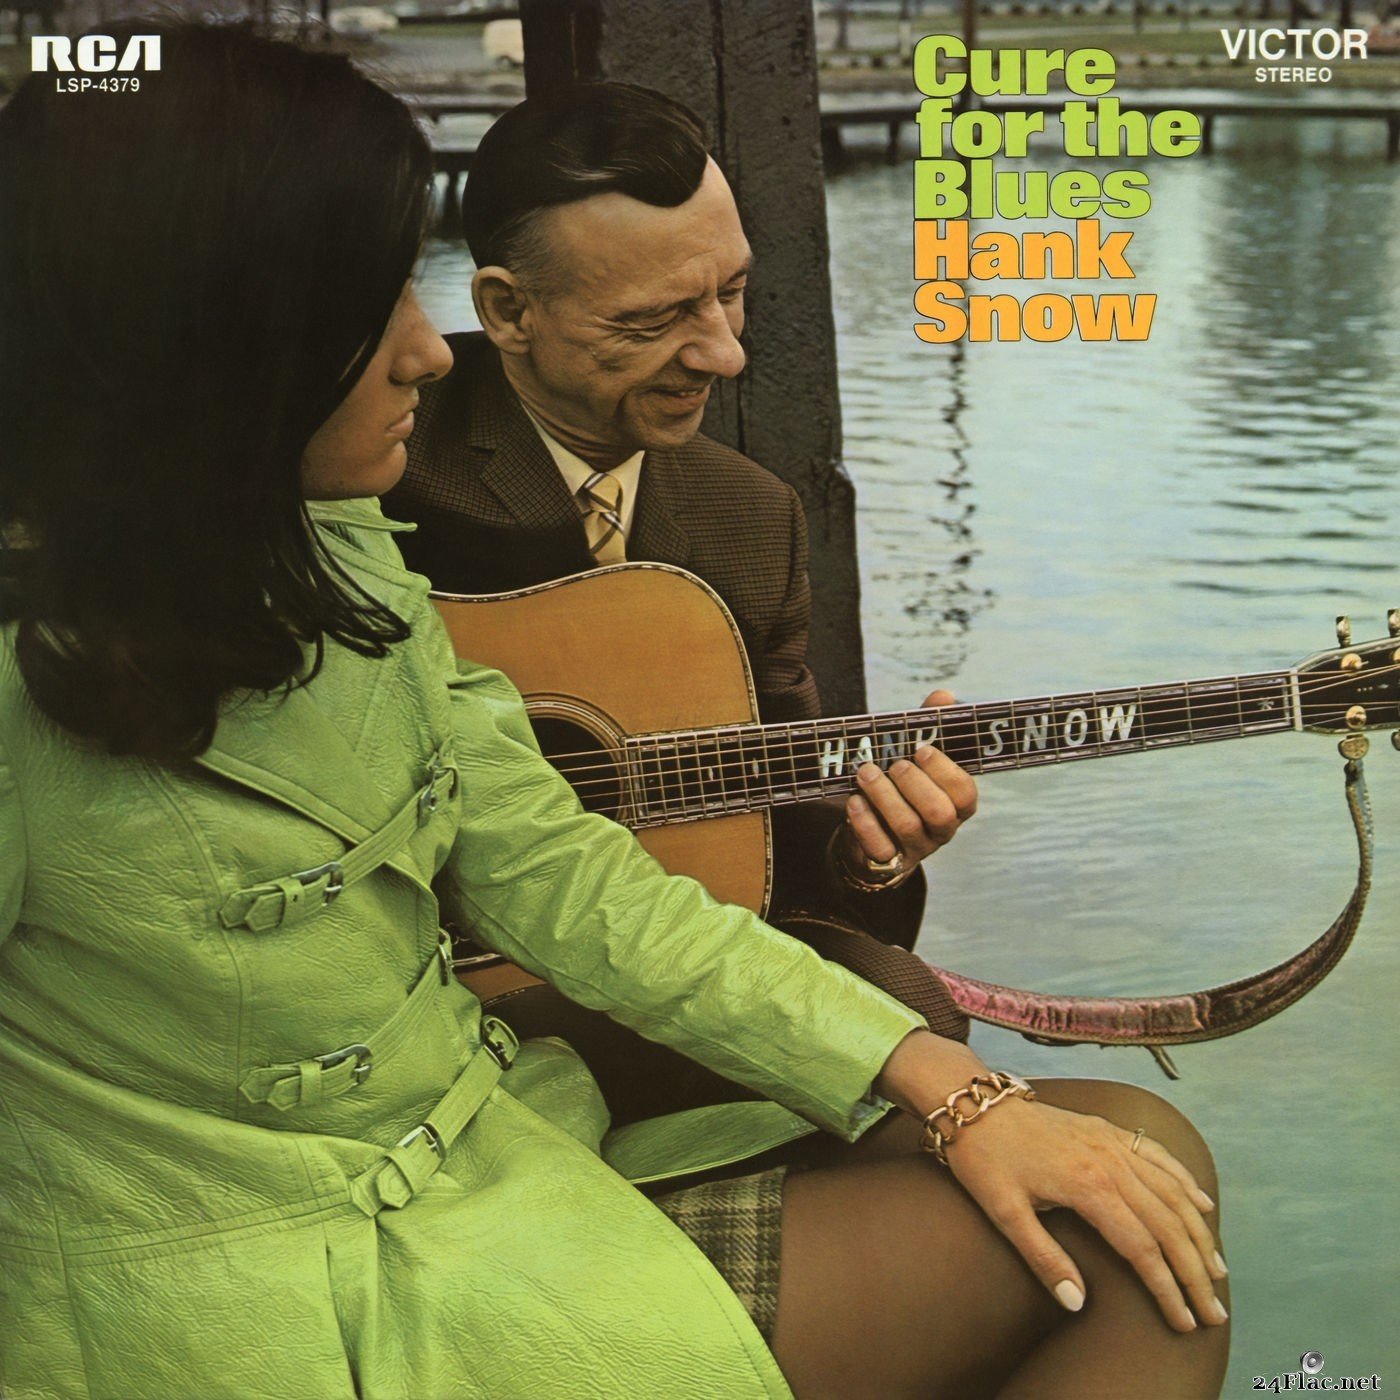 Hank Snow - Cure for the Blues (2021) Hi-Res